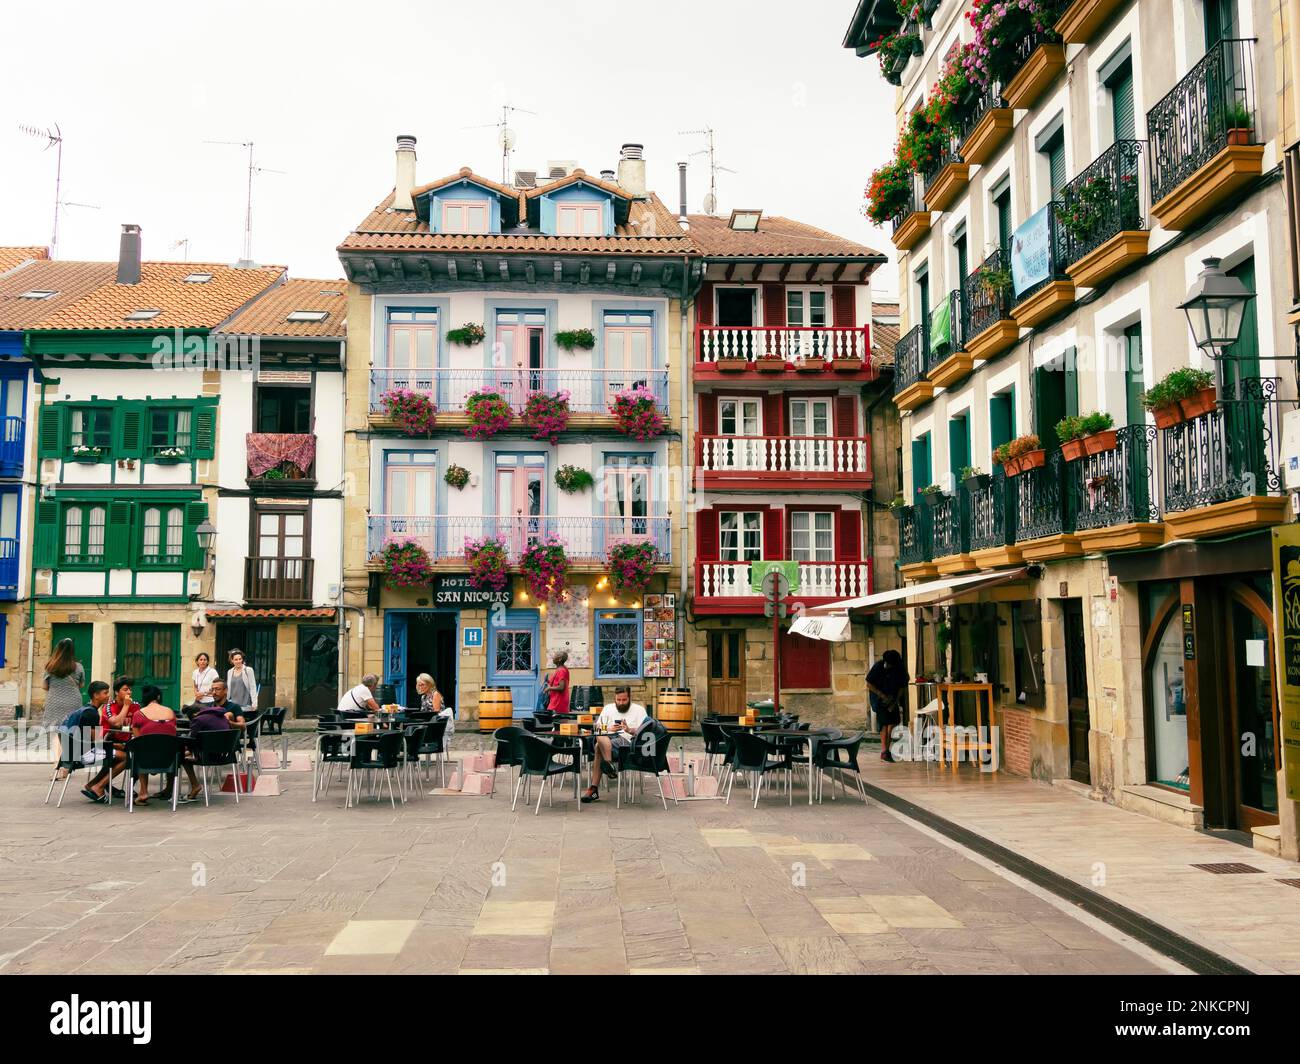 People sitting in the market place of Hondarribia, Basque Country, Spain Stock Photo